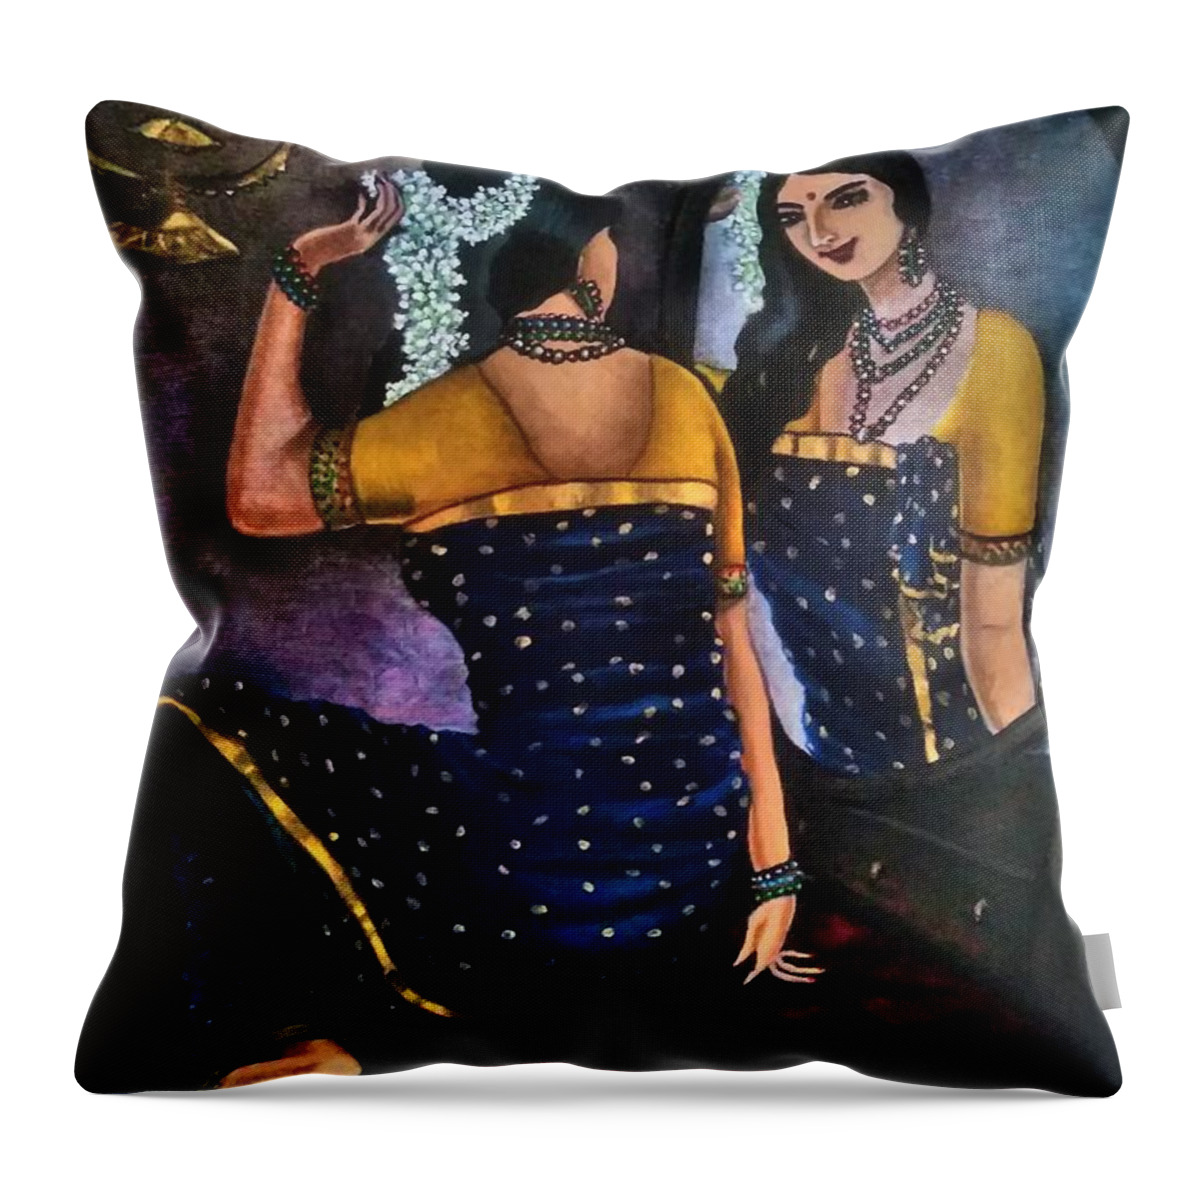 Woman Throw Pillow featuring the painting Woman in front of mirror by Tara Krishna